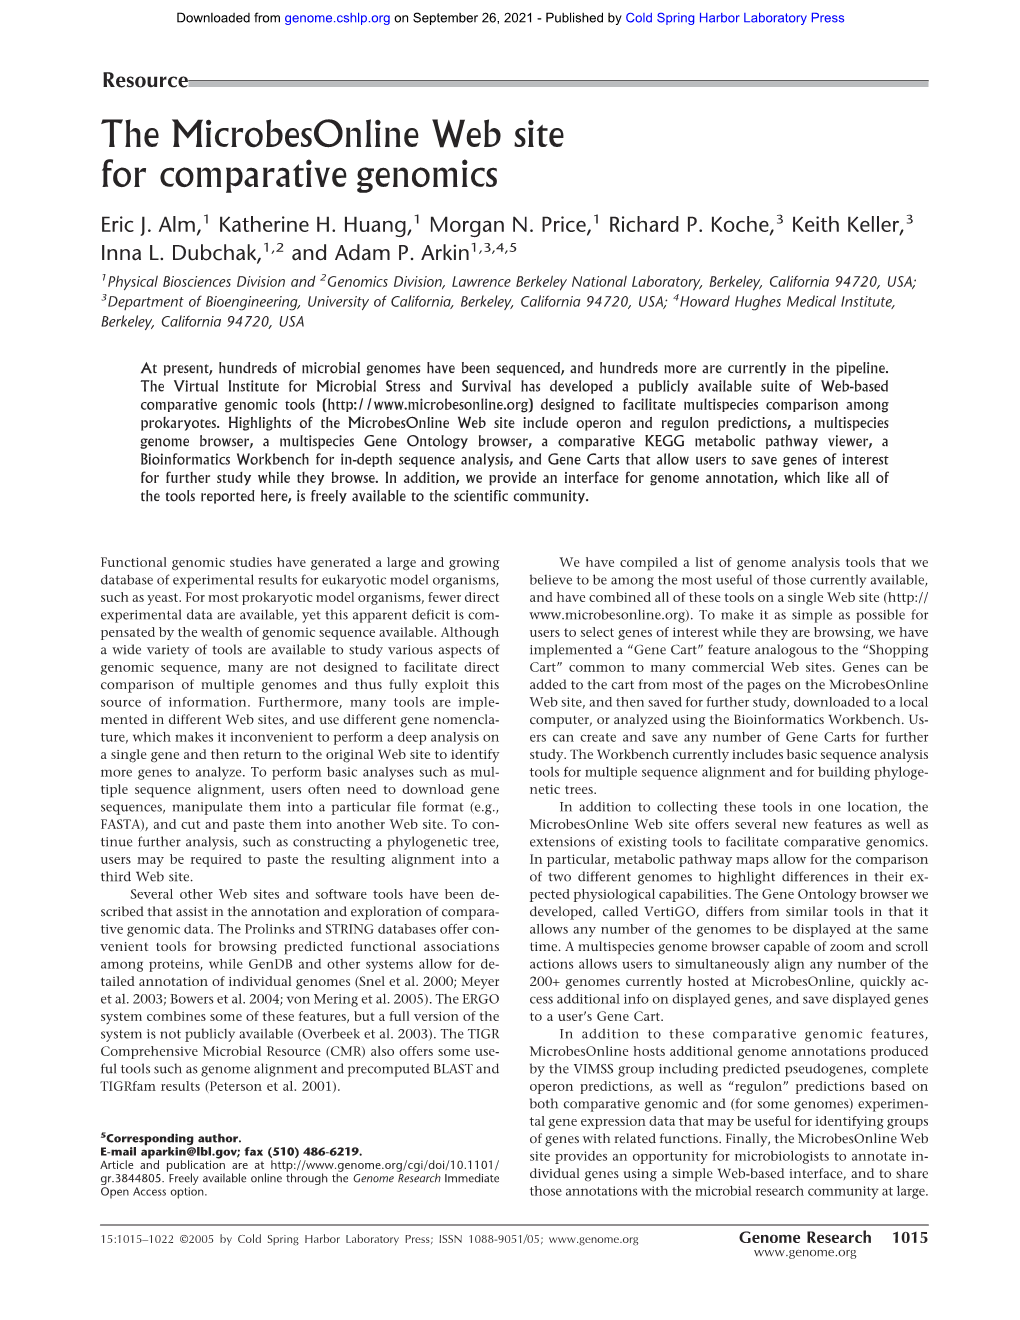 The Microbesonline Web Site for Comparative Genomics